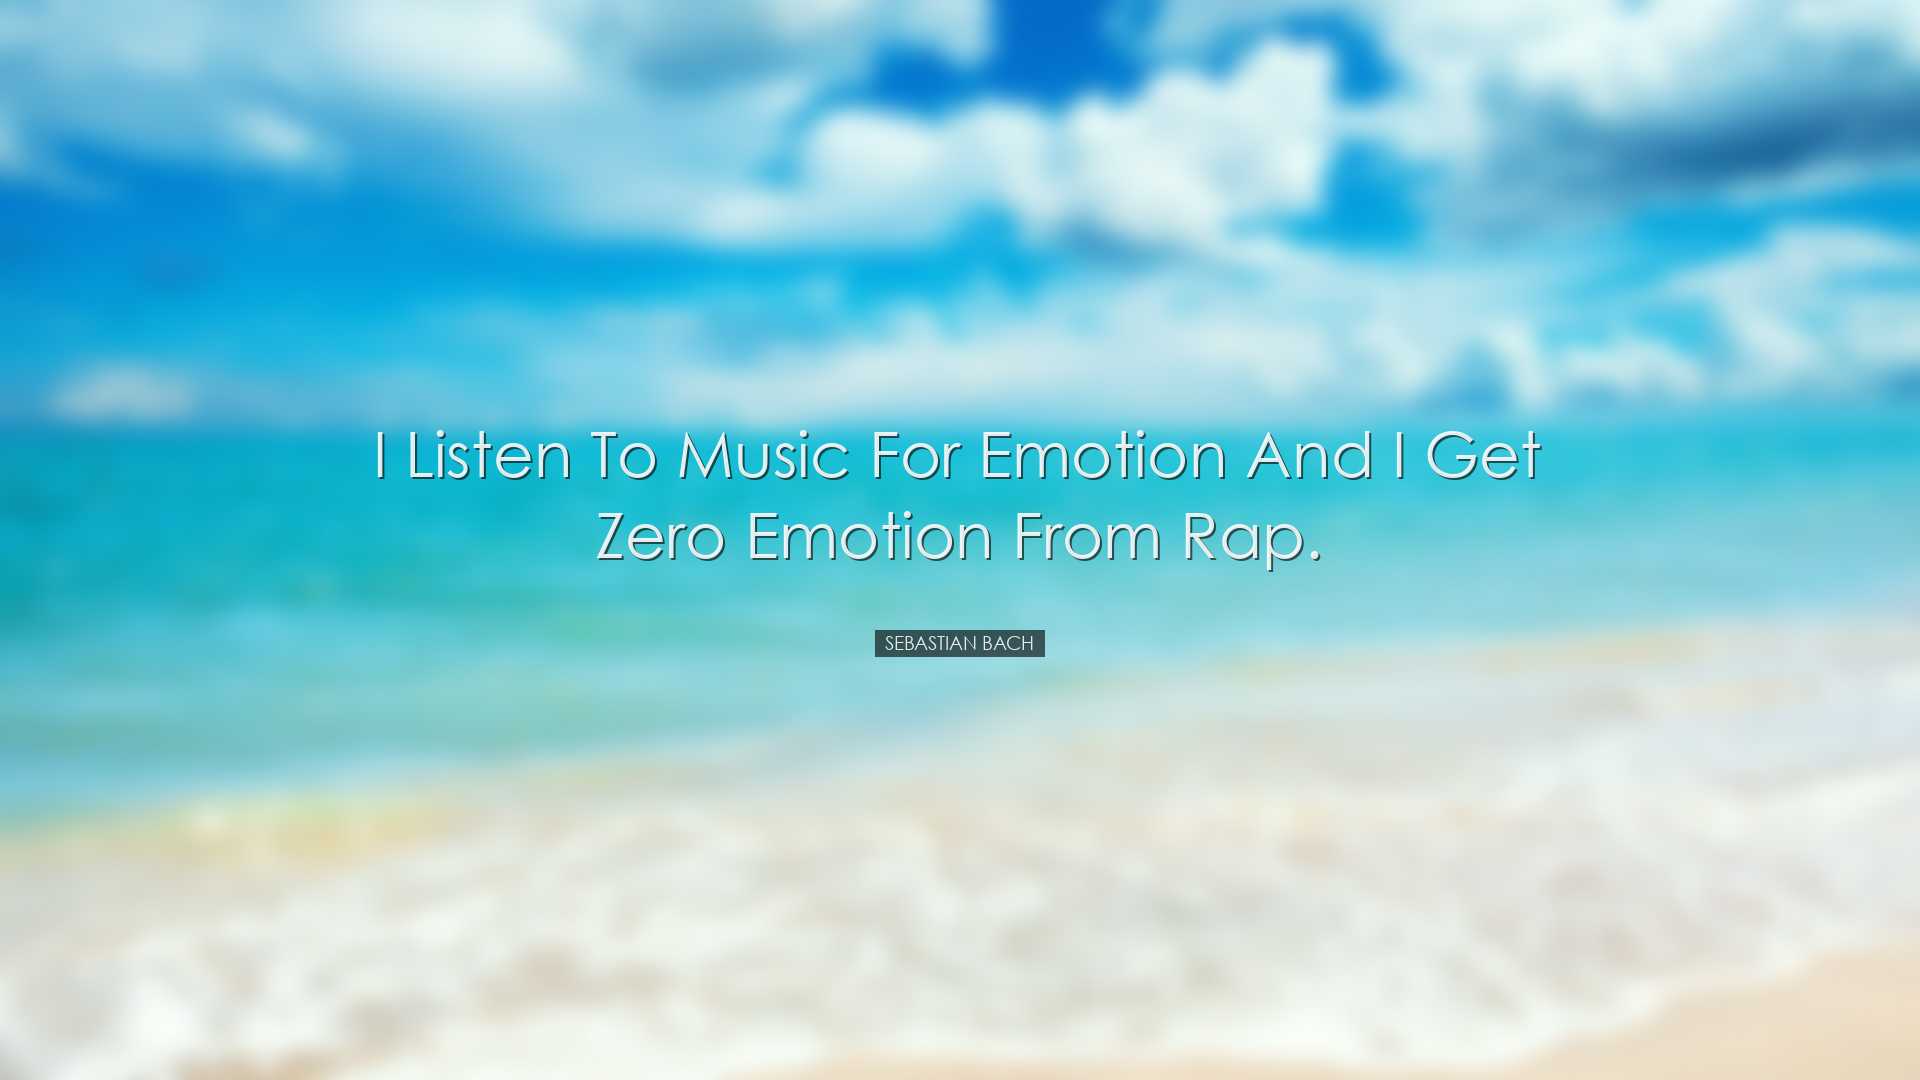 I listen to music for emotion and I get zero emotion from rap. - S